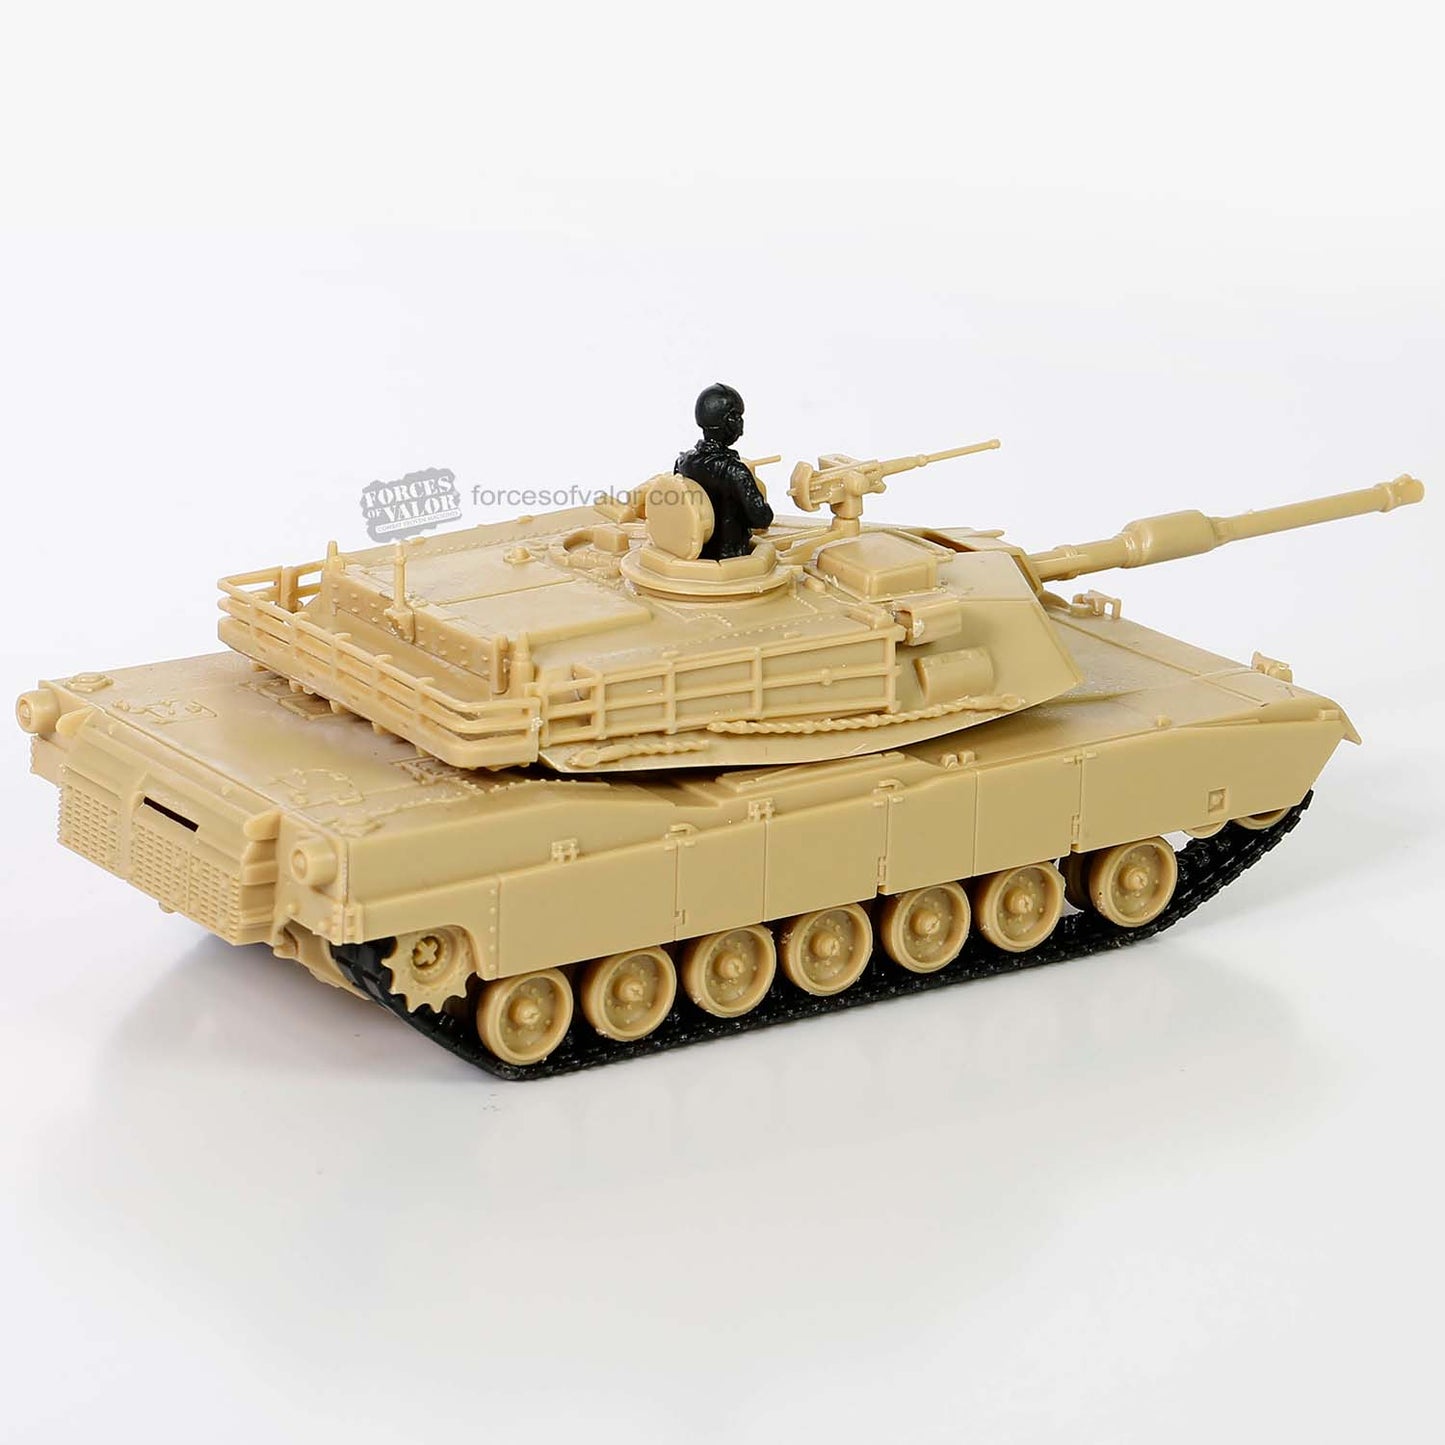 Forces Of Valor 1/72 Scale Kit U.S M1A2 Abrams Tank - Iraq 2003